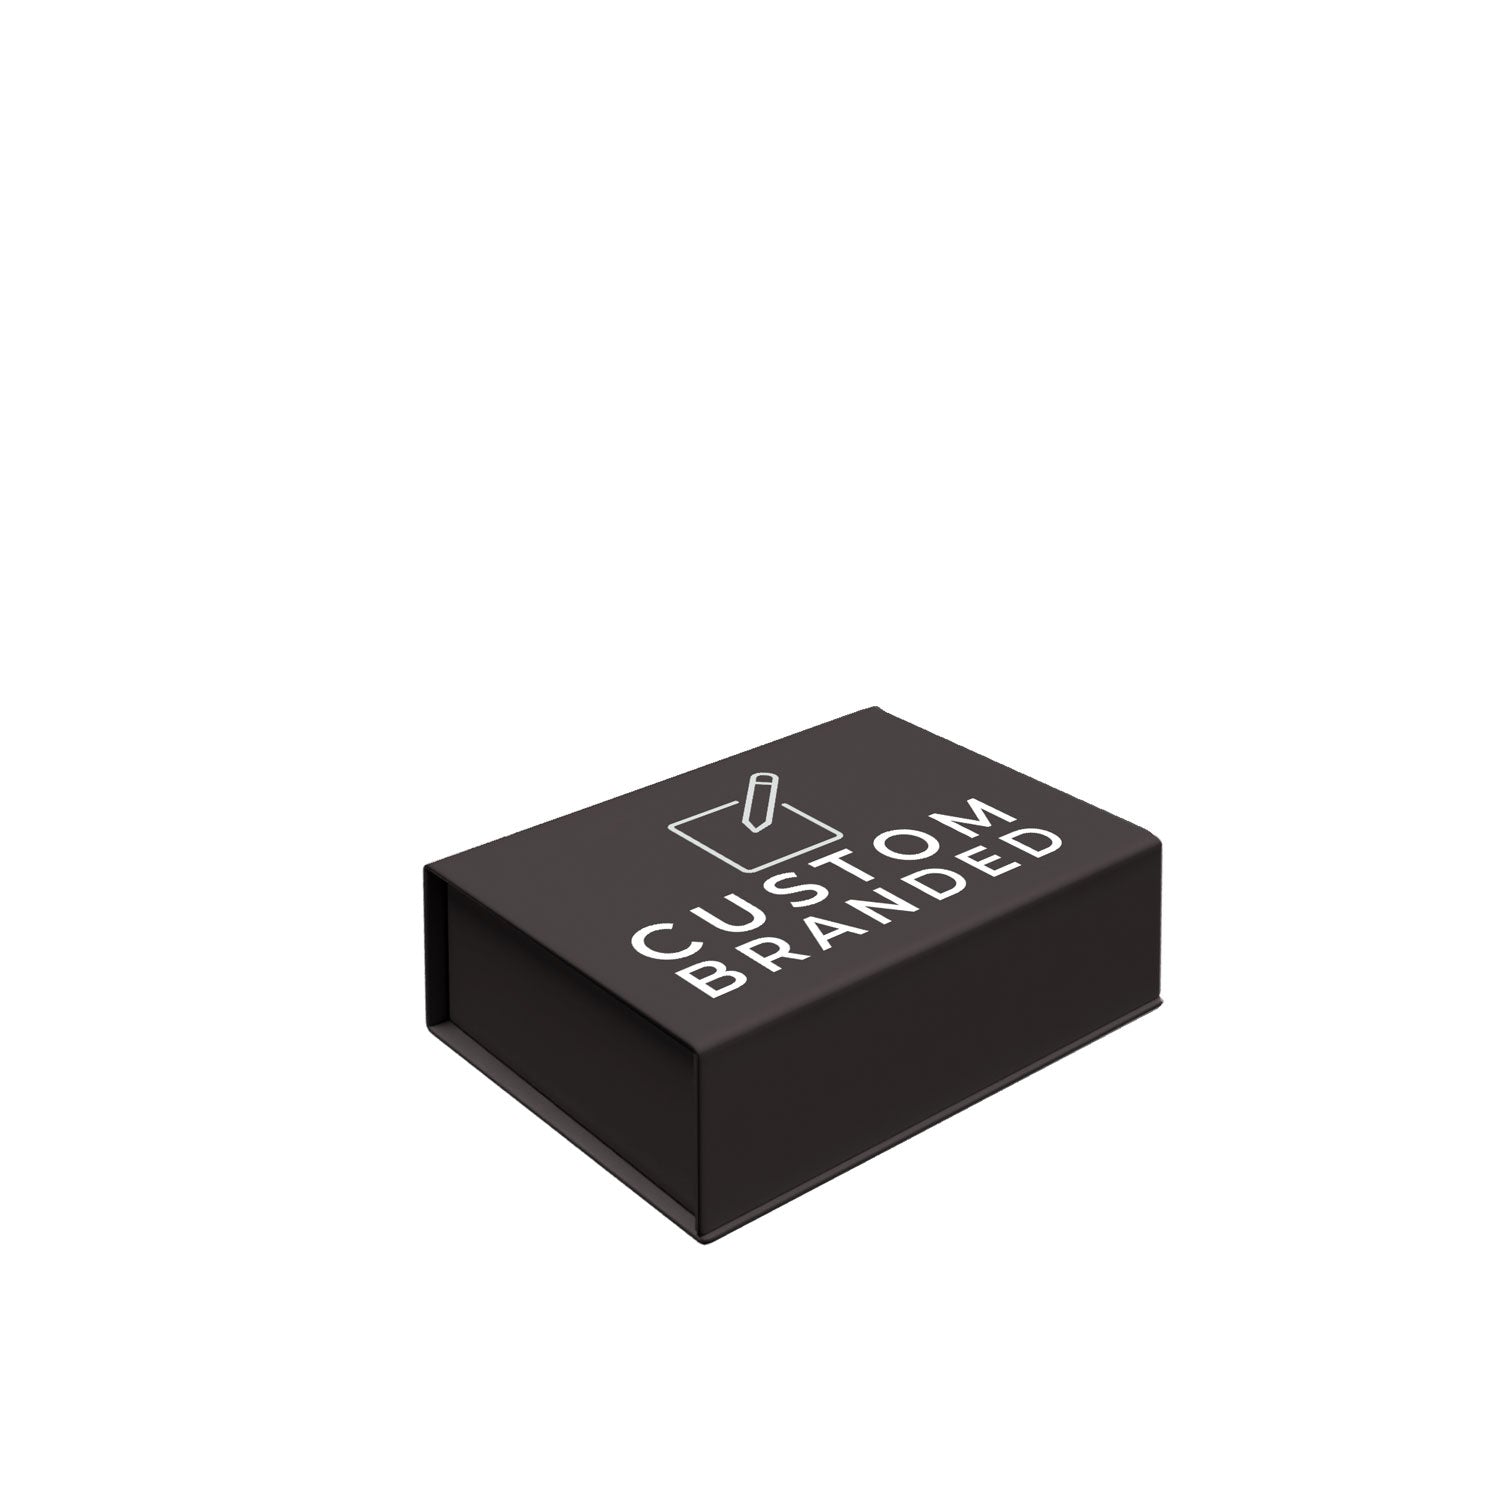 A small-sized black gift box featuring the word "custom" printed on it, symbolizing a branded and personalized item.